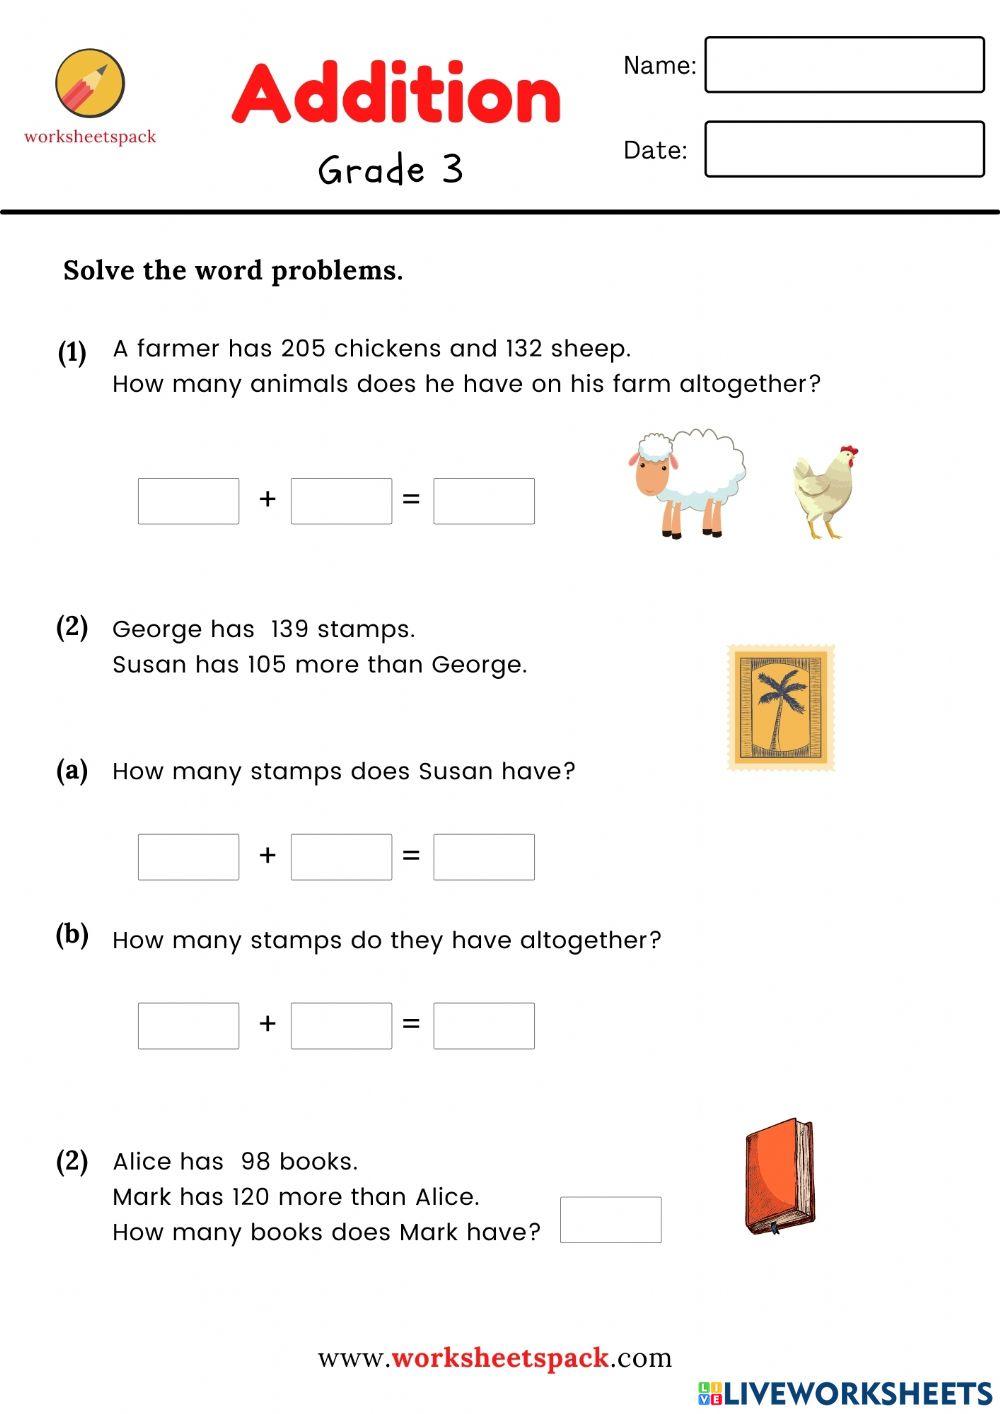 Addition solve the word problems